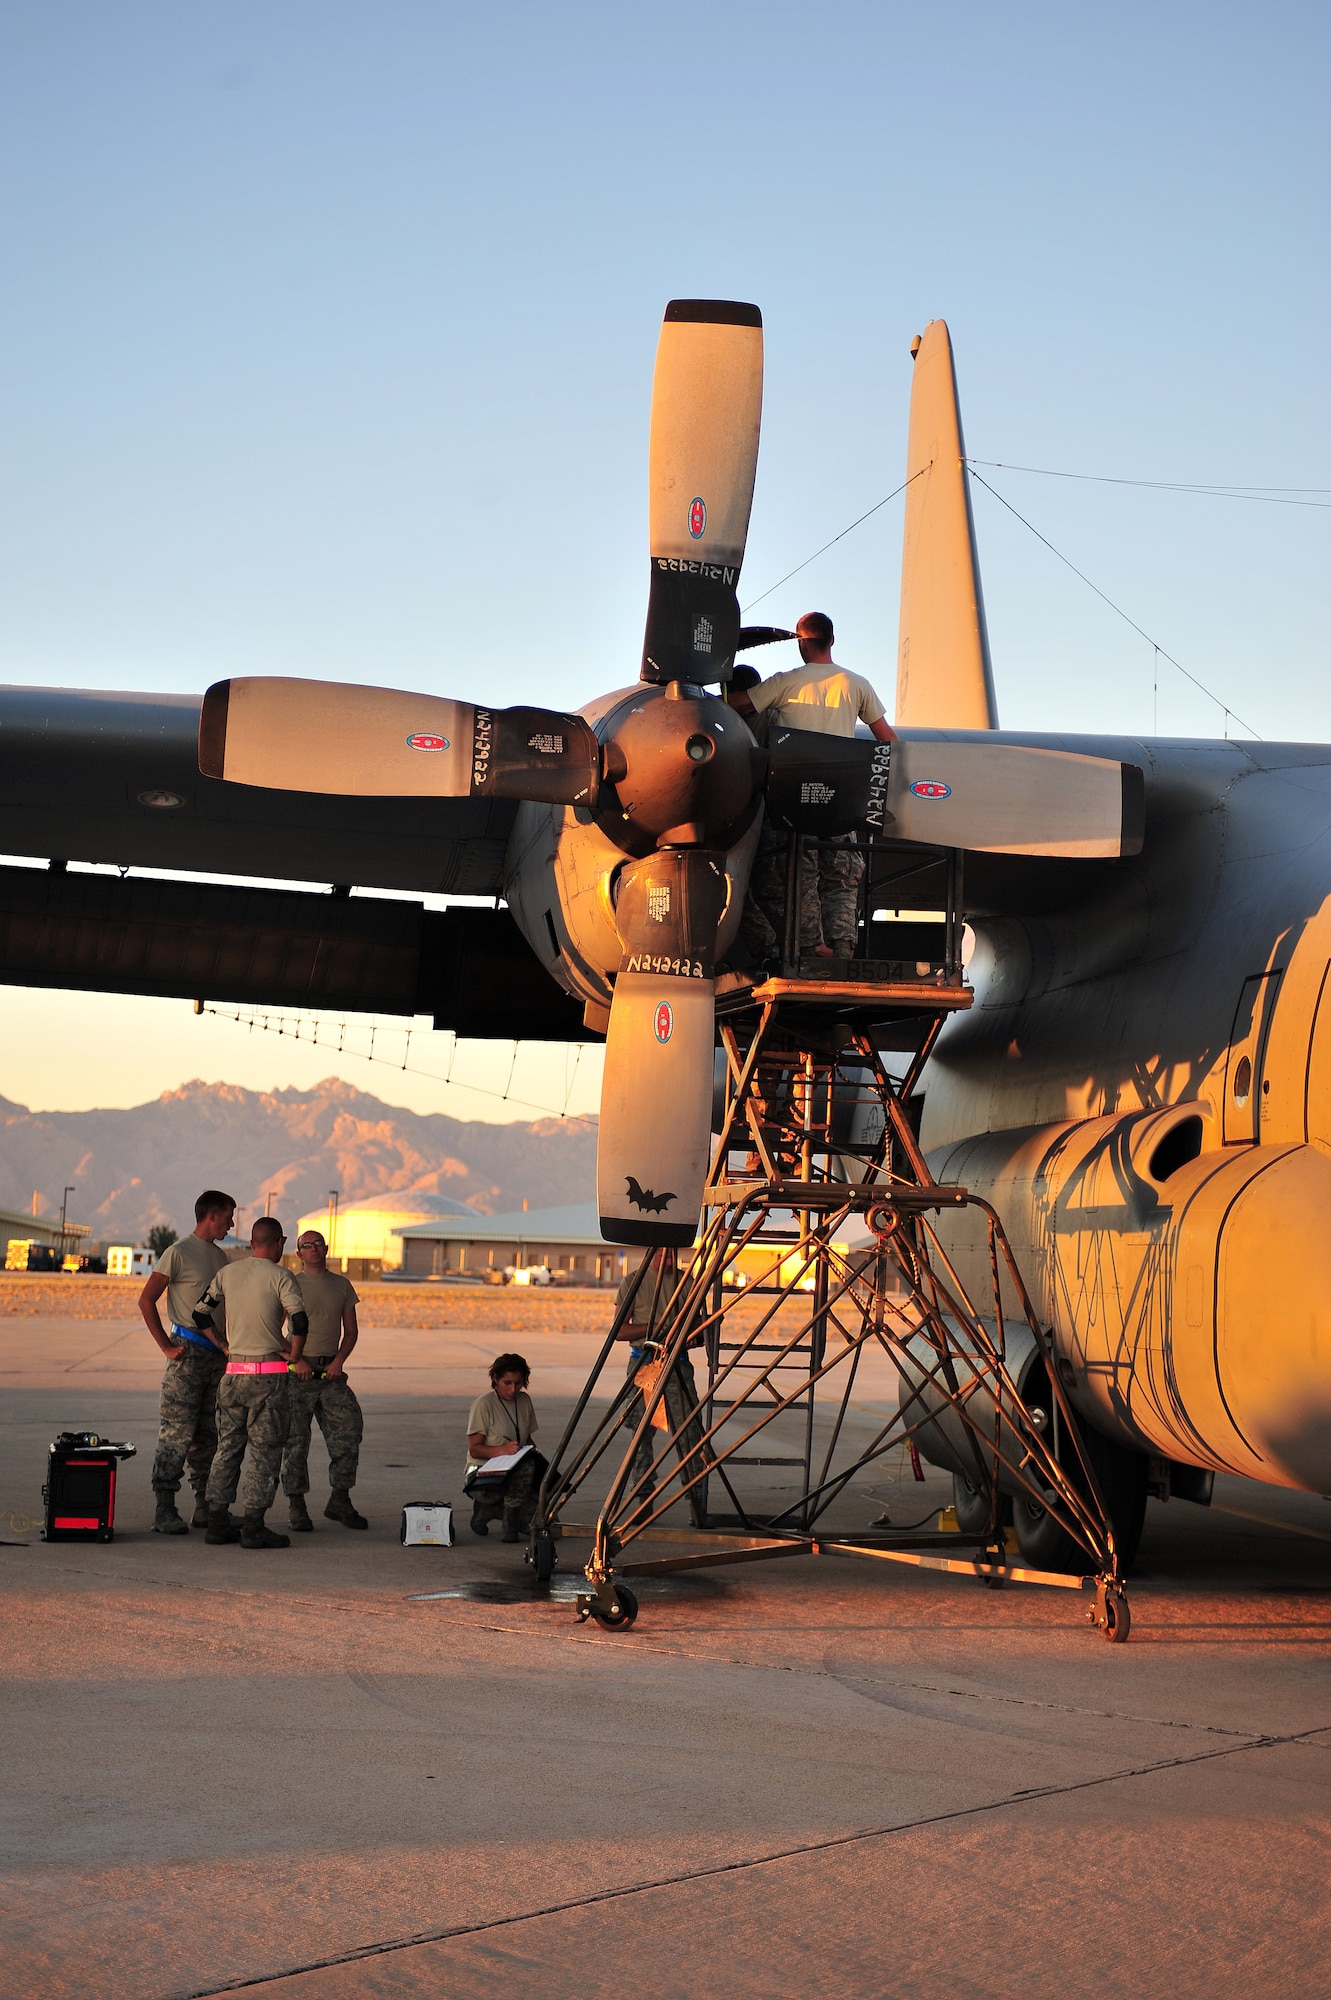 U.S. Air Force Airmen from the 755th Aircraft Maintenance Squadron, work together to fix the EC-130H engine on Davis-Monthan Air Force Base, Ariz., Oct. 15, 2012. The Airmen from the 755th AMXS are part of the 55th Electronic Combat Group. (U.S. Air Force photo by Airman 1st Class Josh Slavin/Released)